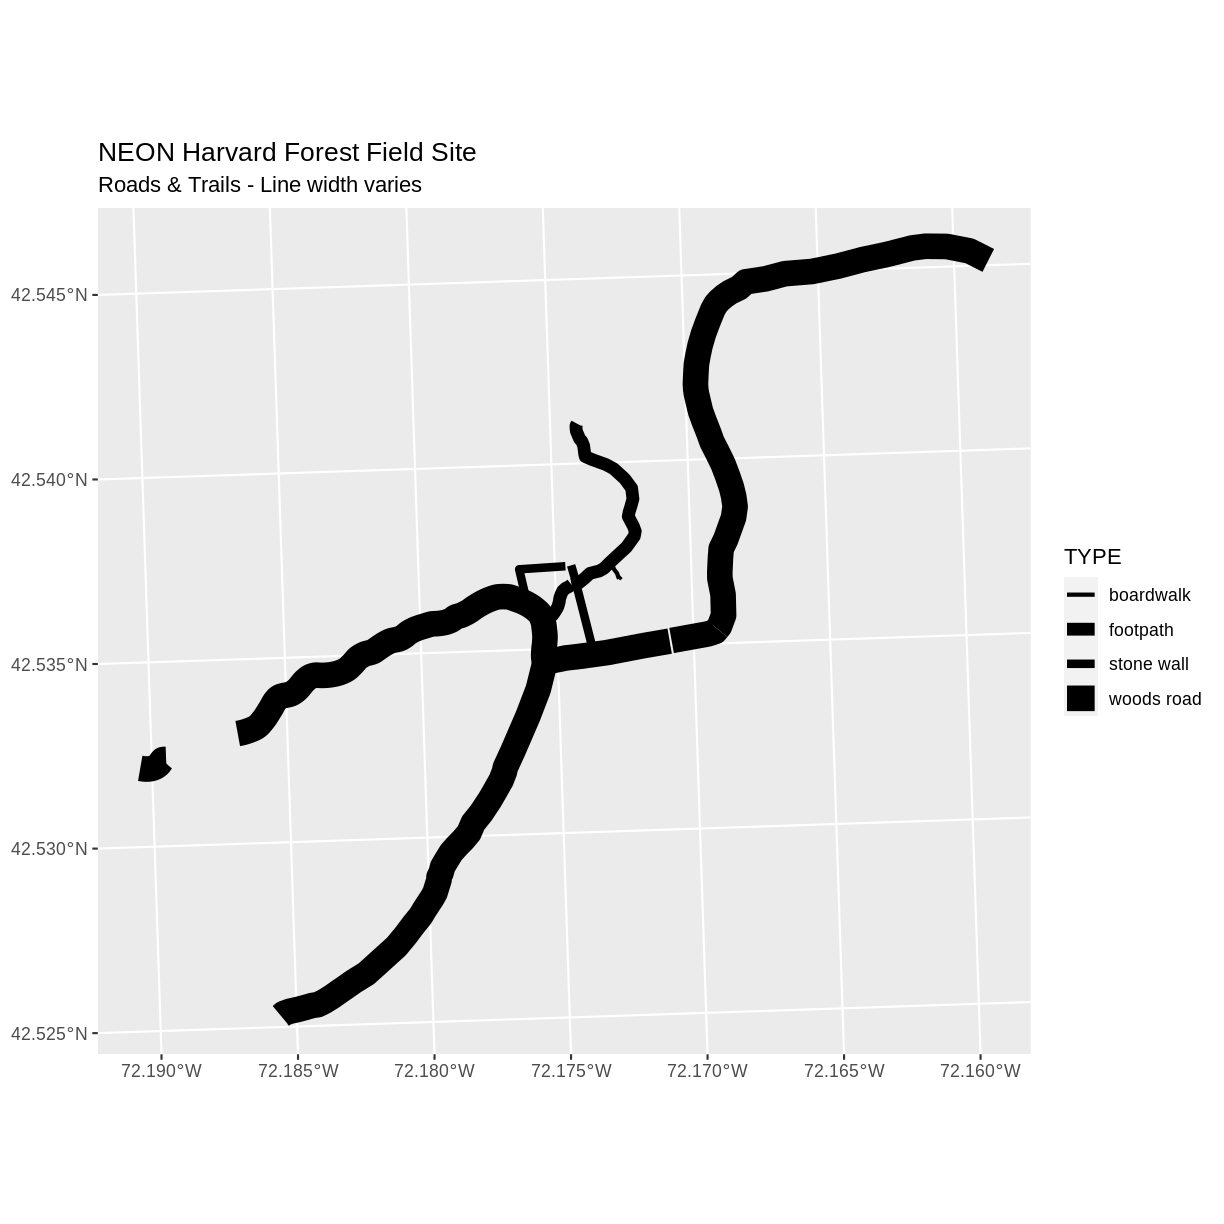 Roads and trails in the area with different line thickness for each type of paths.